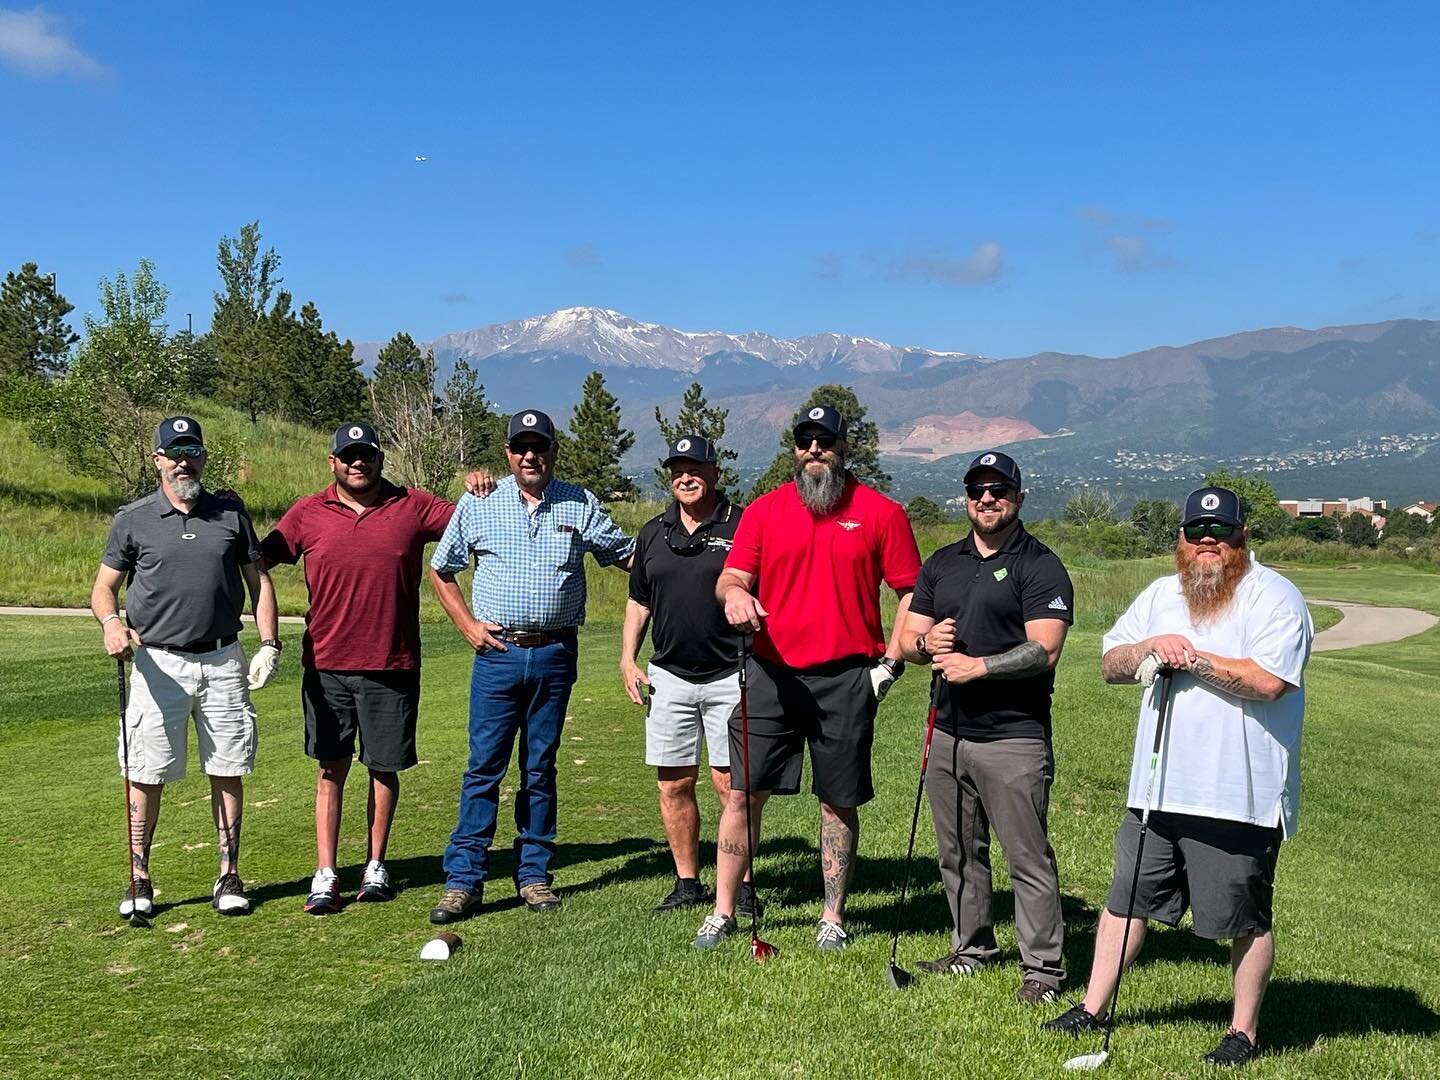 Last Friday, we headed out to Colorado for the 28th Annual O&rsquo;Furry&rsquo;s golf tournament. This year it was held at the Pine Creek Golf Course in Colorado Springs and the event was such a hit that it sold out!Richard Sanchez lined up our veter